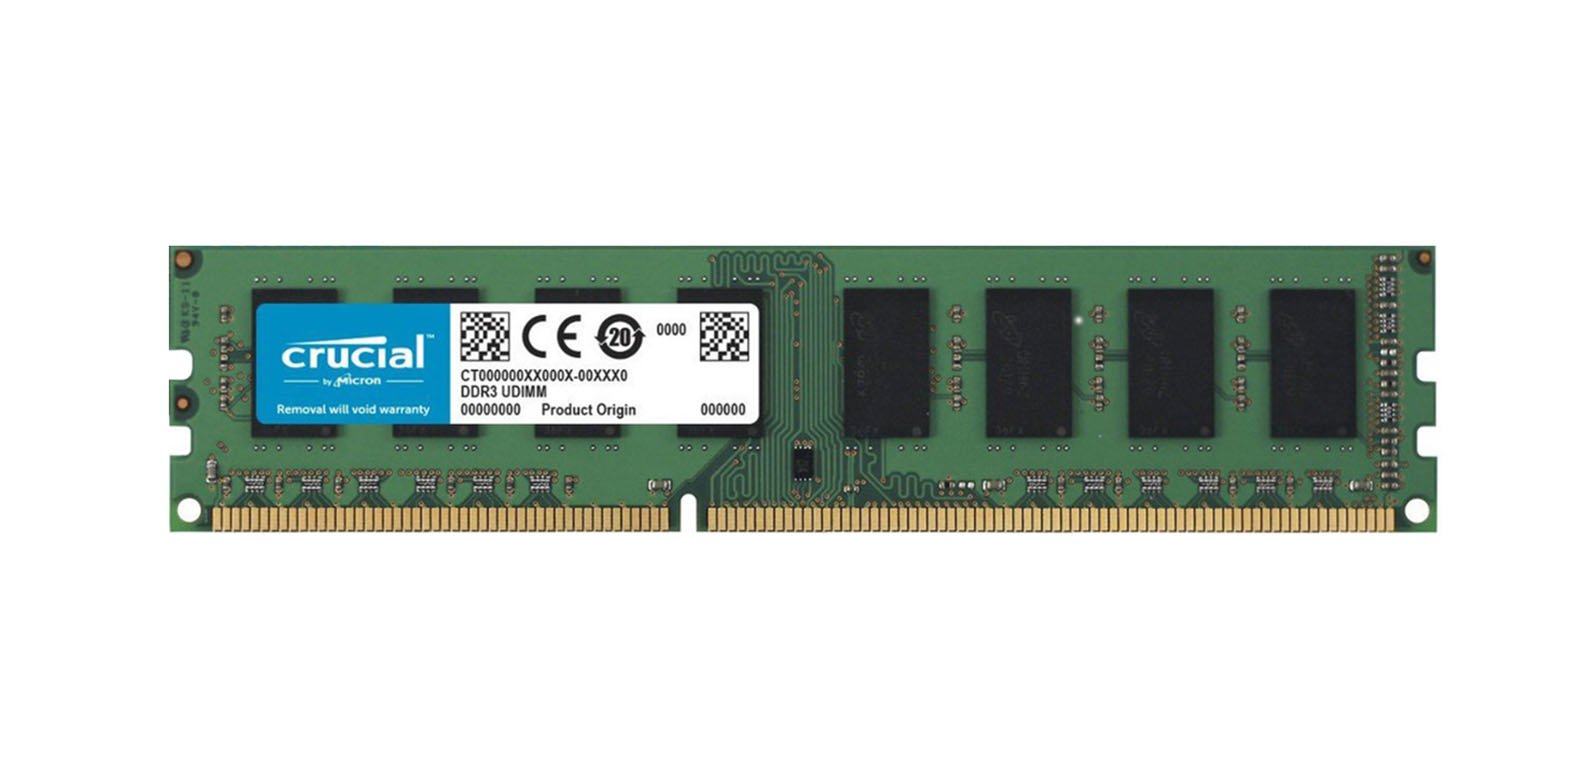 Crucial CT6026390 16GB DDR3-1600MHz PC3-12800 ECC Registered CL11 240-Pin DIMM 1.35V Low Voltage Dual Rank Very Low Profile (VLP) Memory Module Upgrade for HP - Compaq ProLiant SL4540 Gen8